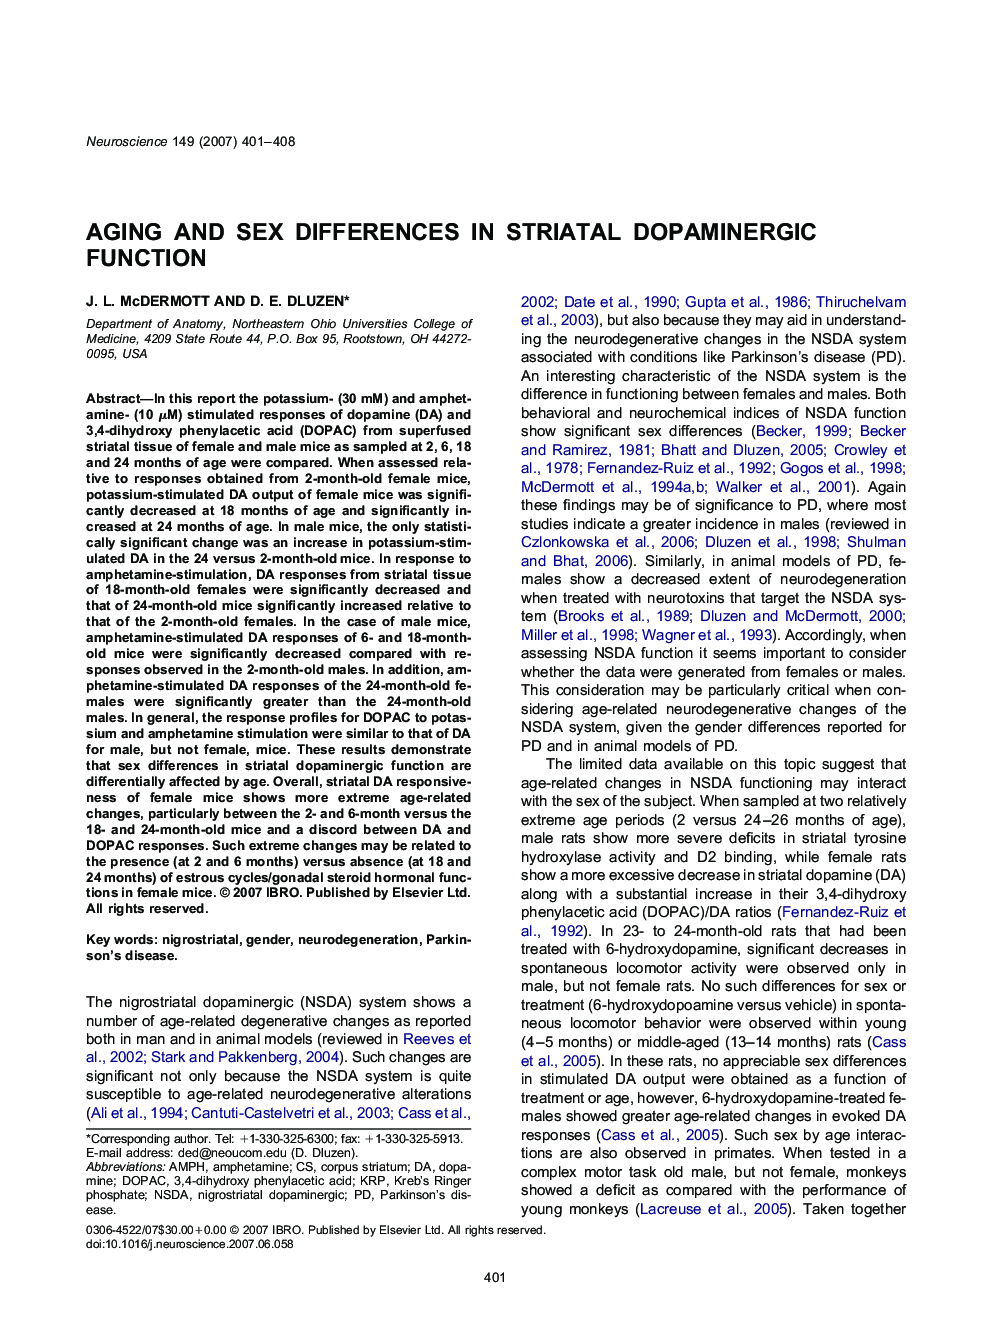 Aging and sex differences in striatal dopaminergic function